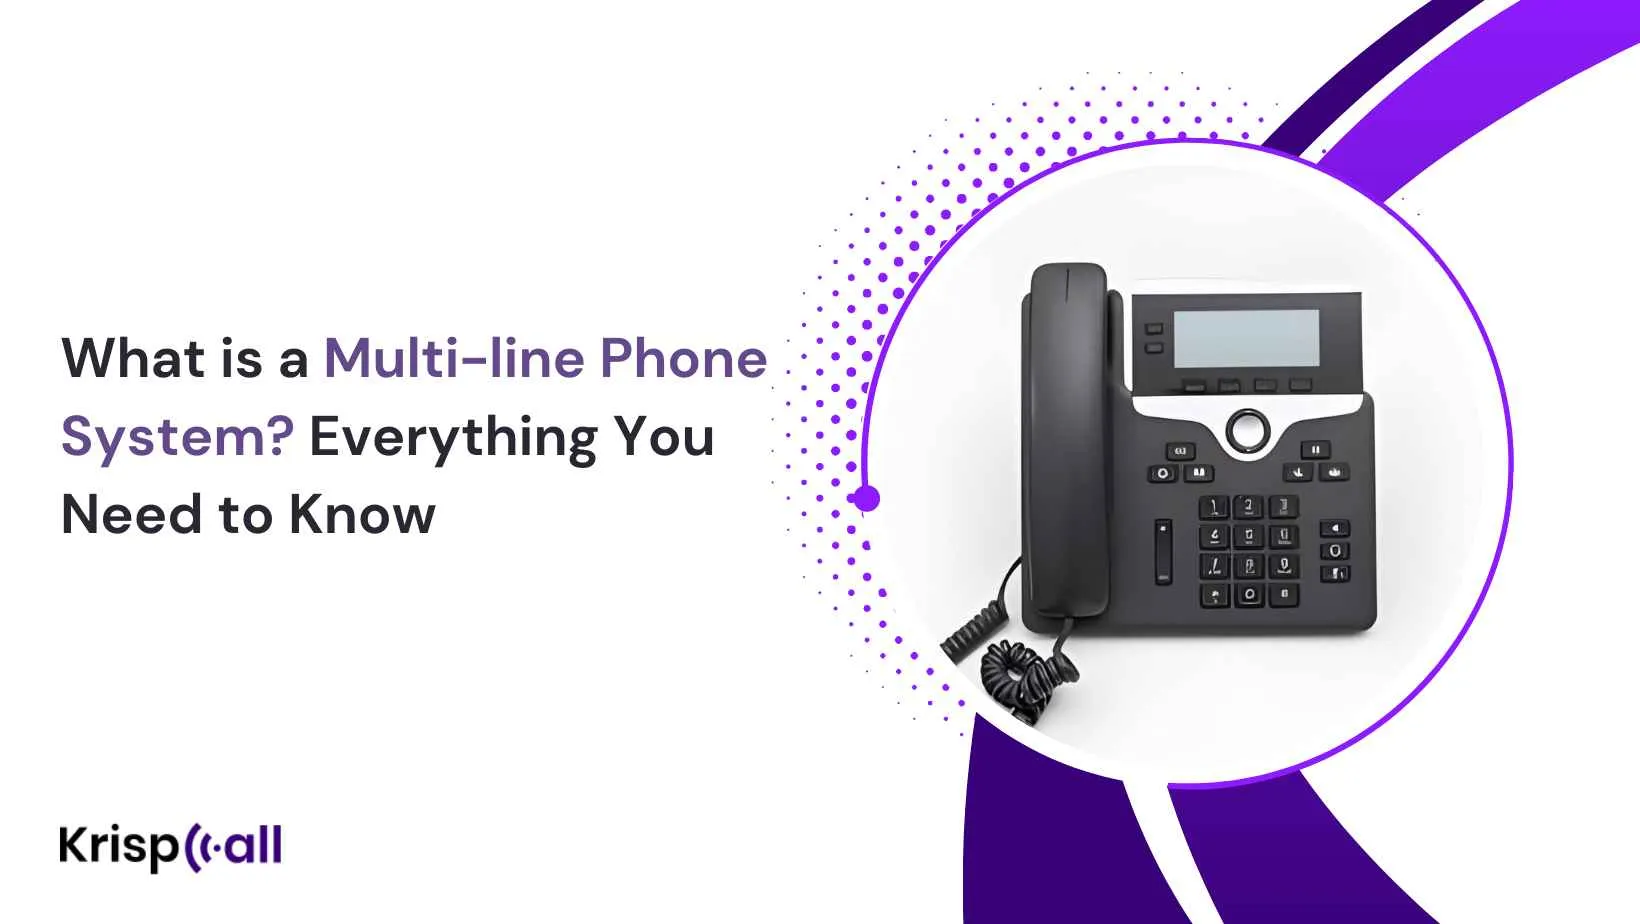 What is a Multi-line Phone System? : Everything You Need to Know